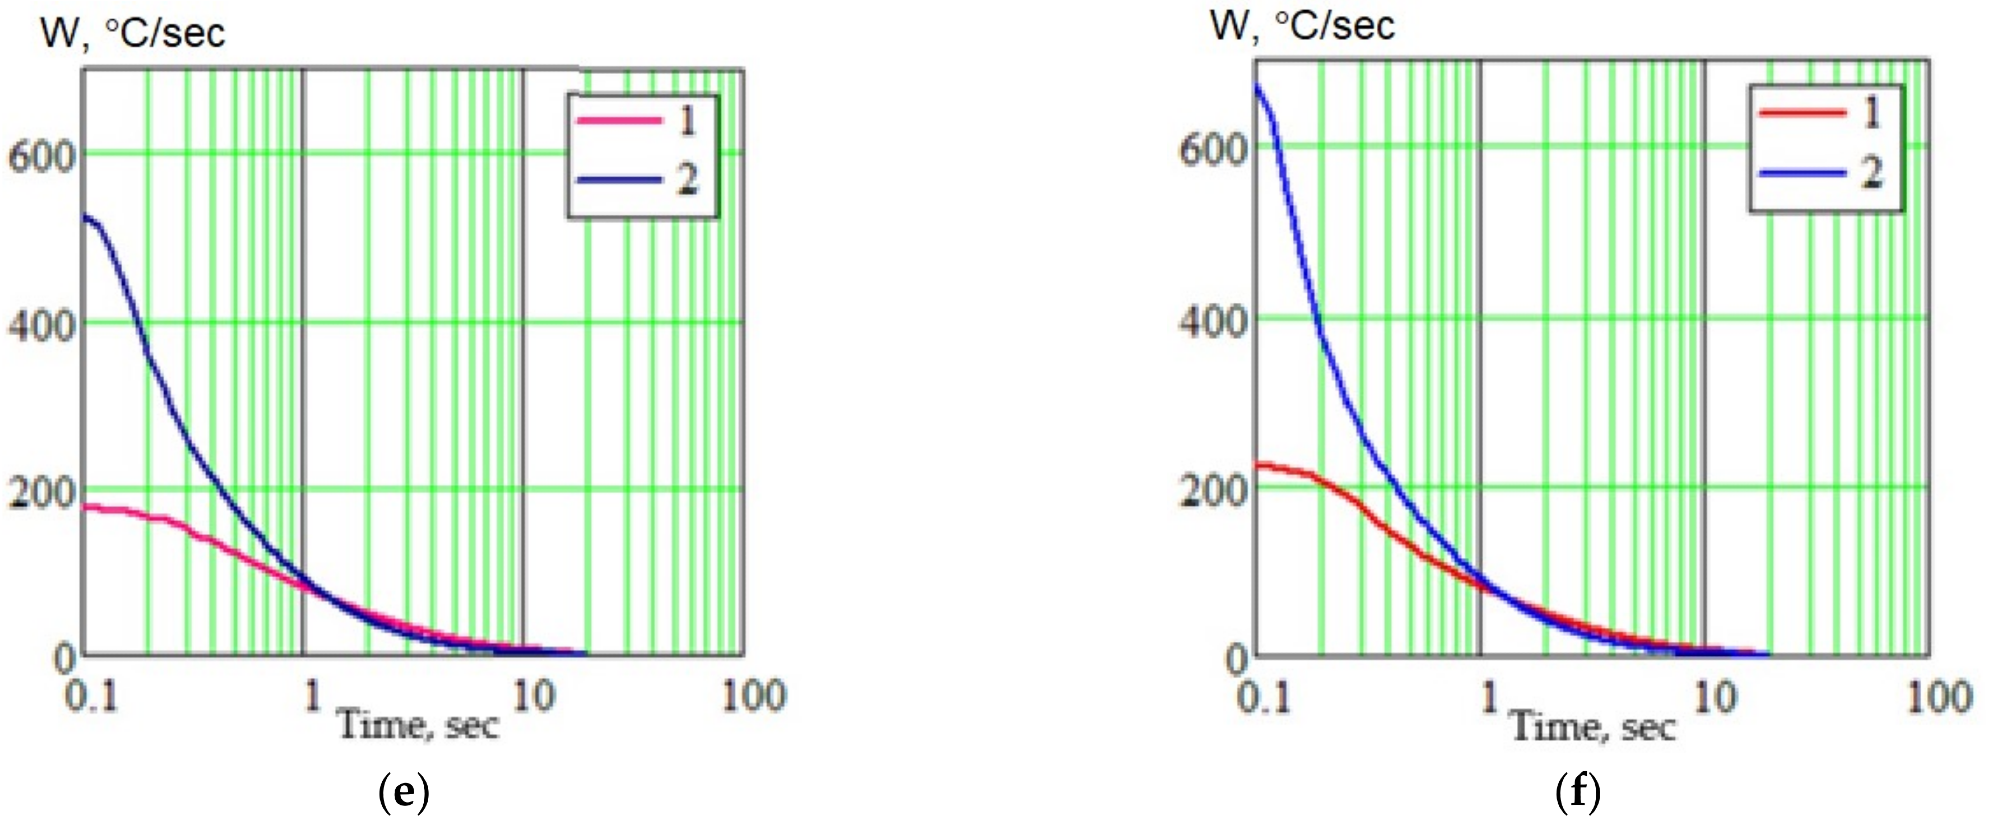 Calculation results of thermal cycle parameters for MIG (1) and EBW (2) welding for the fusion zone (a,c,e) and weld metal (b,d,f): (a,b) thermal cycle; (c,d) cooling curves; (e,f) instant cooling rates.